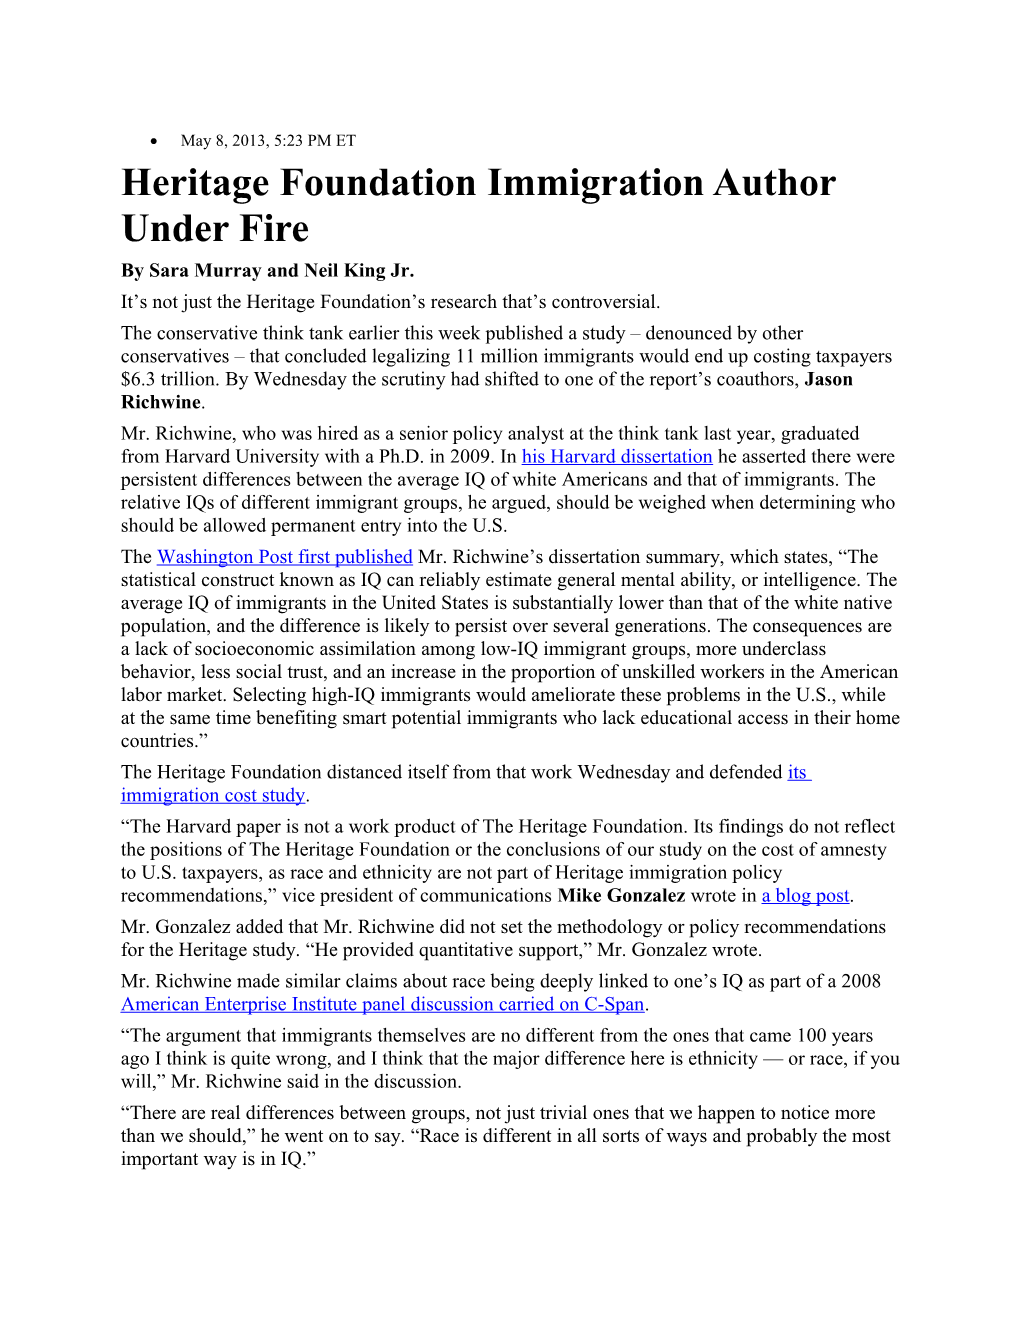 Heritage Foundation Immigration Author Under Fire